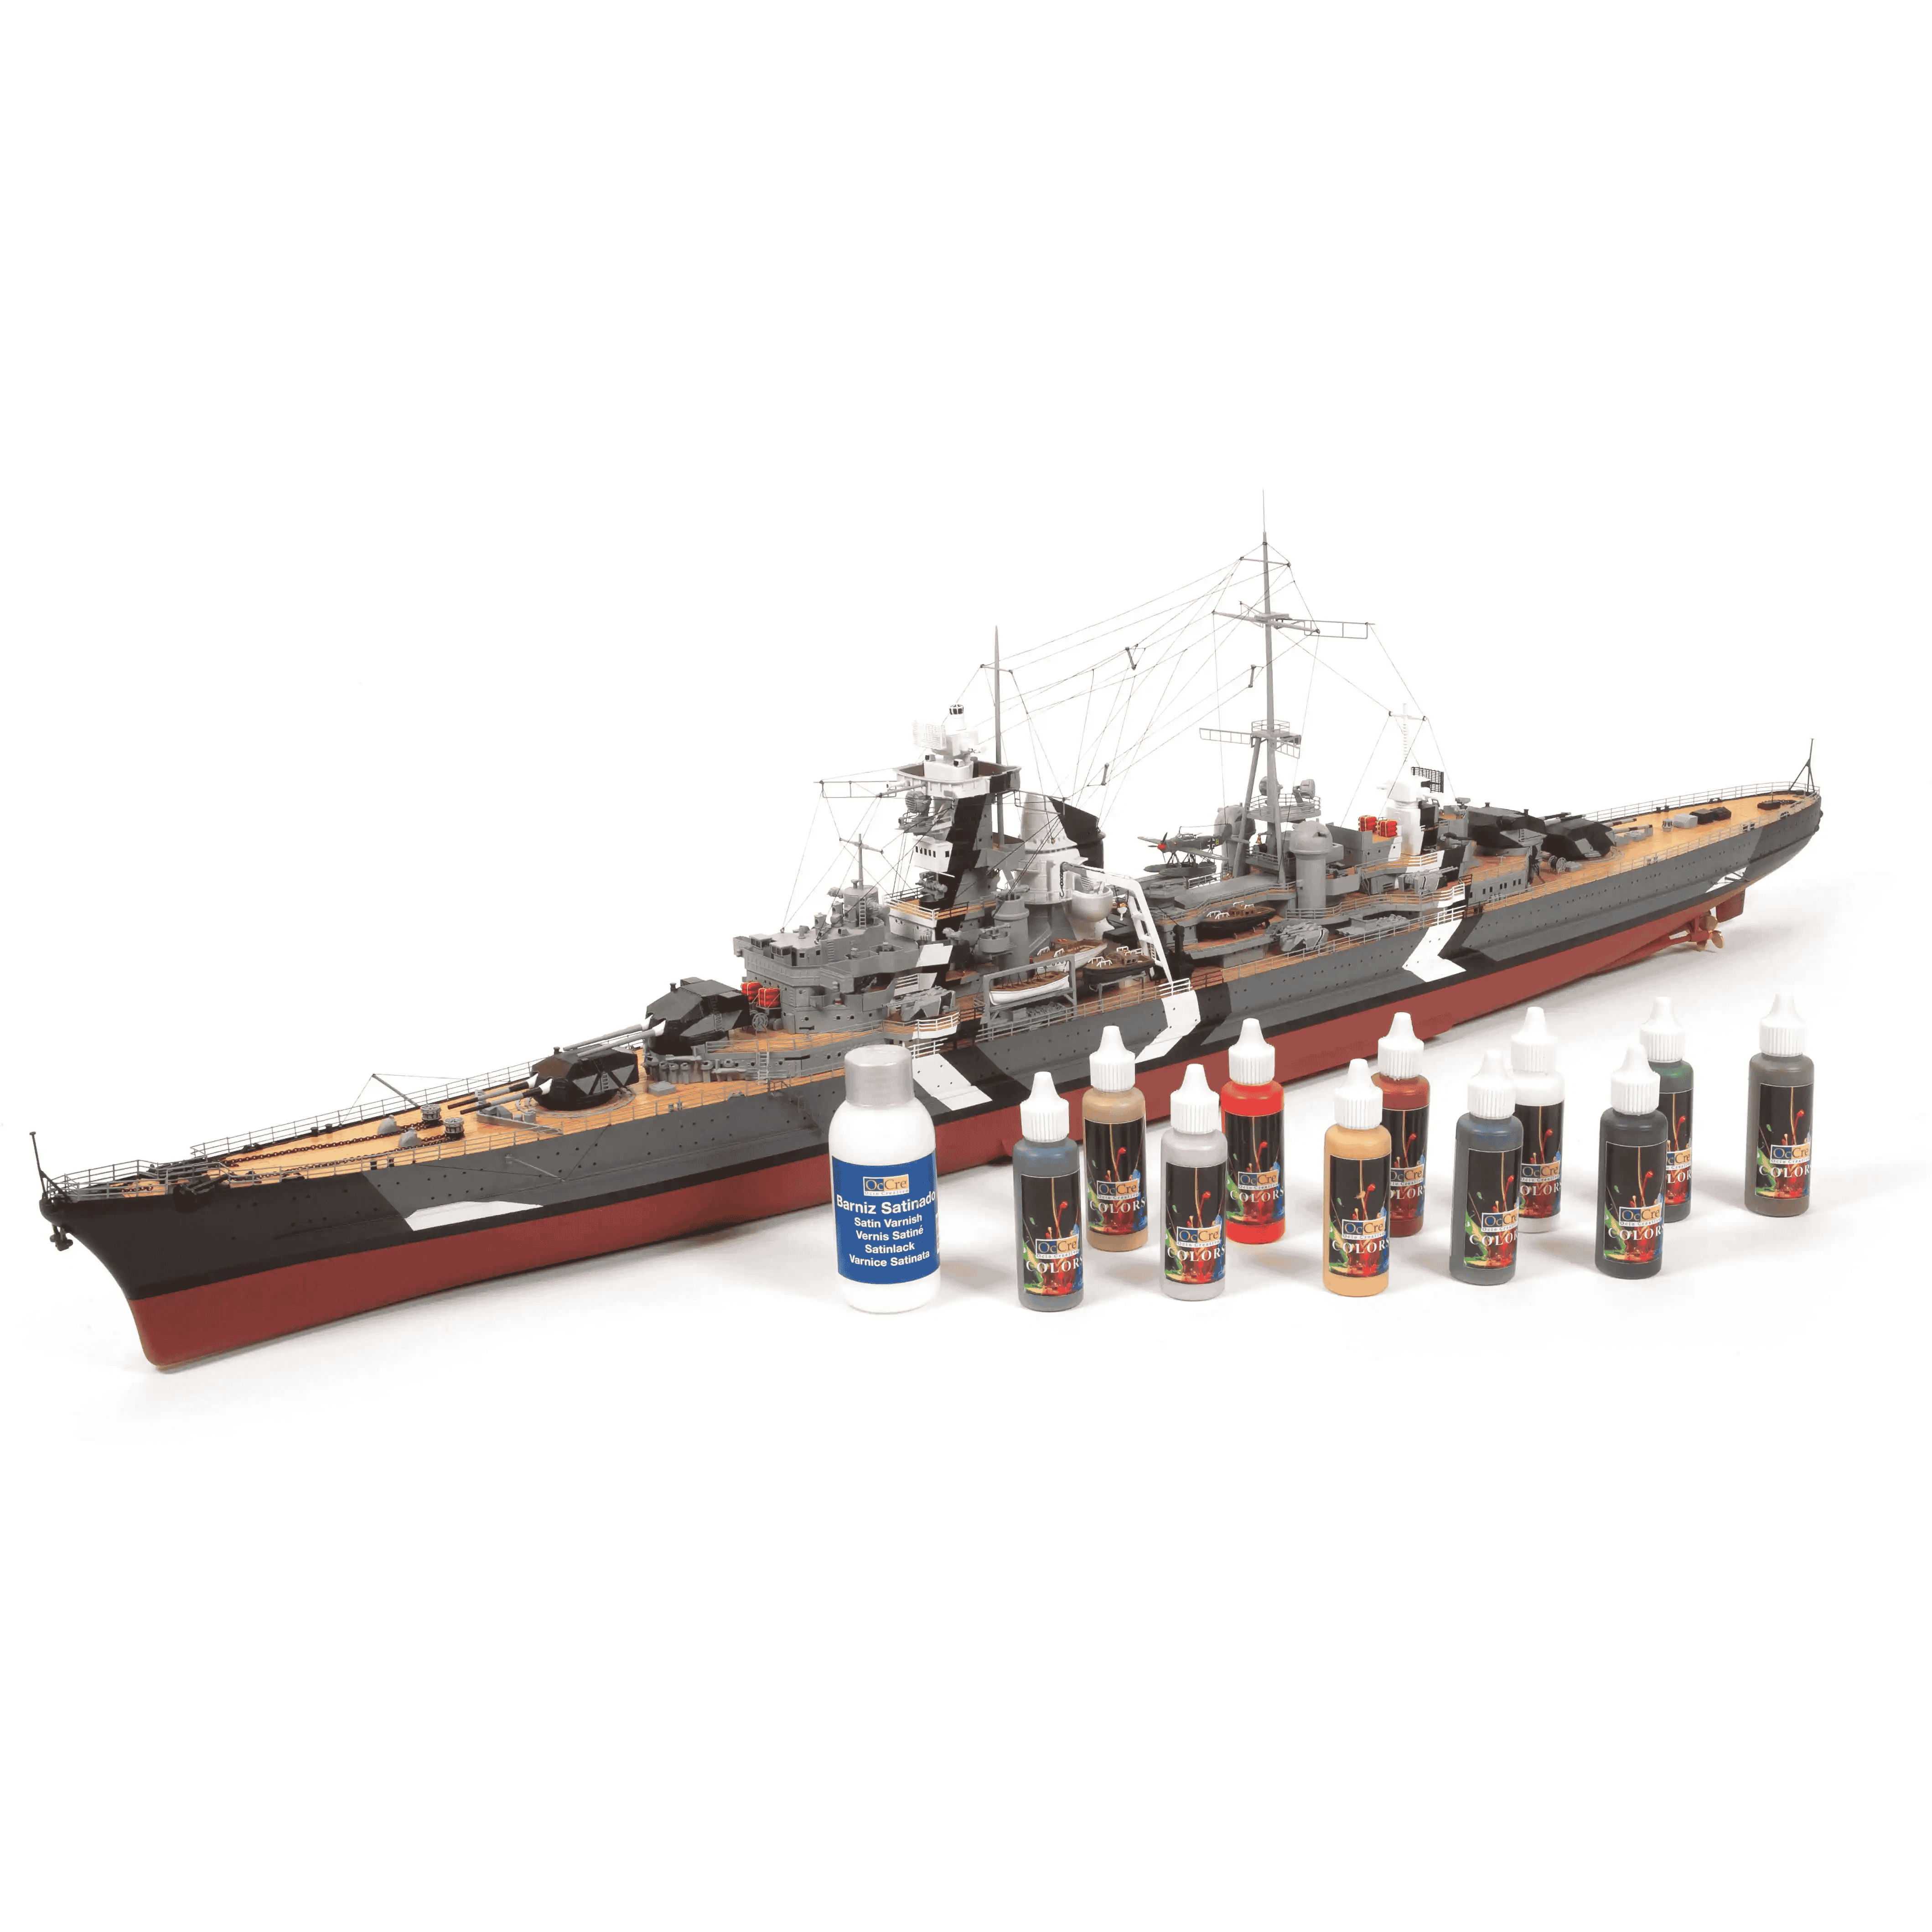 Prinz Eugen Water Based Acrylic Paint Pack - Occre (90506)